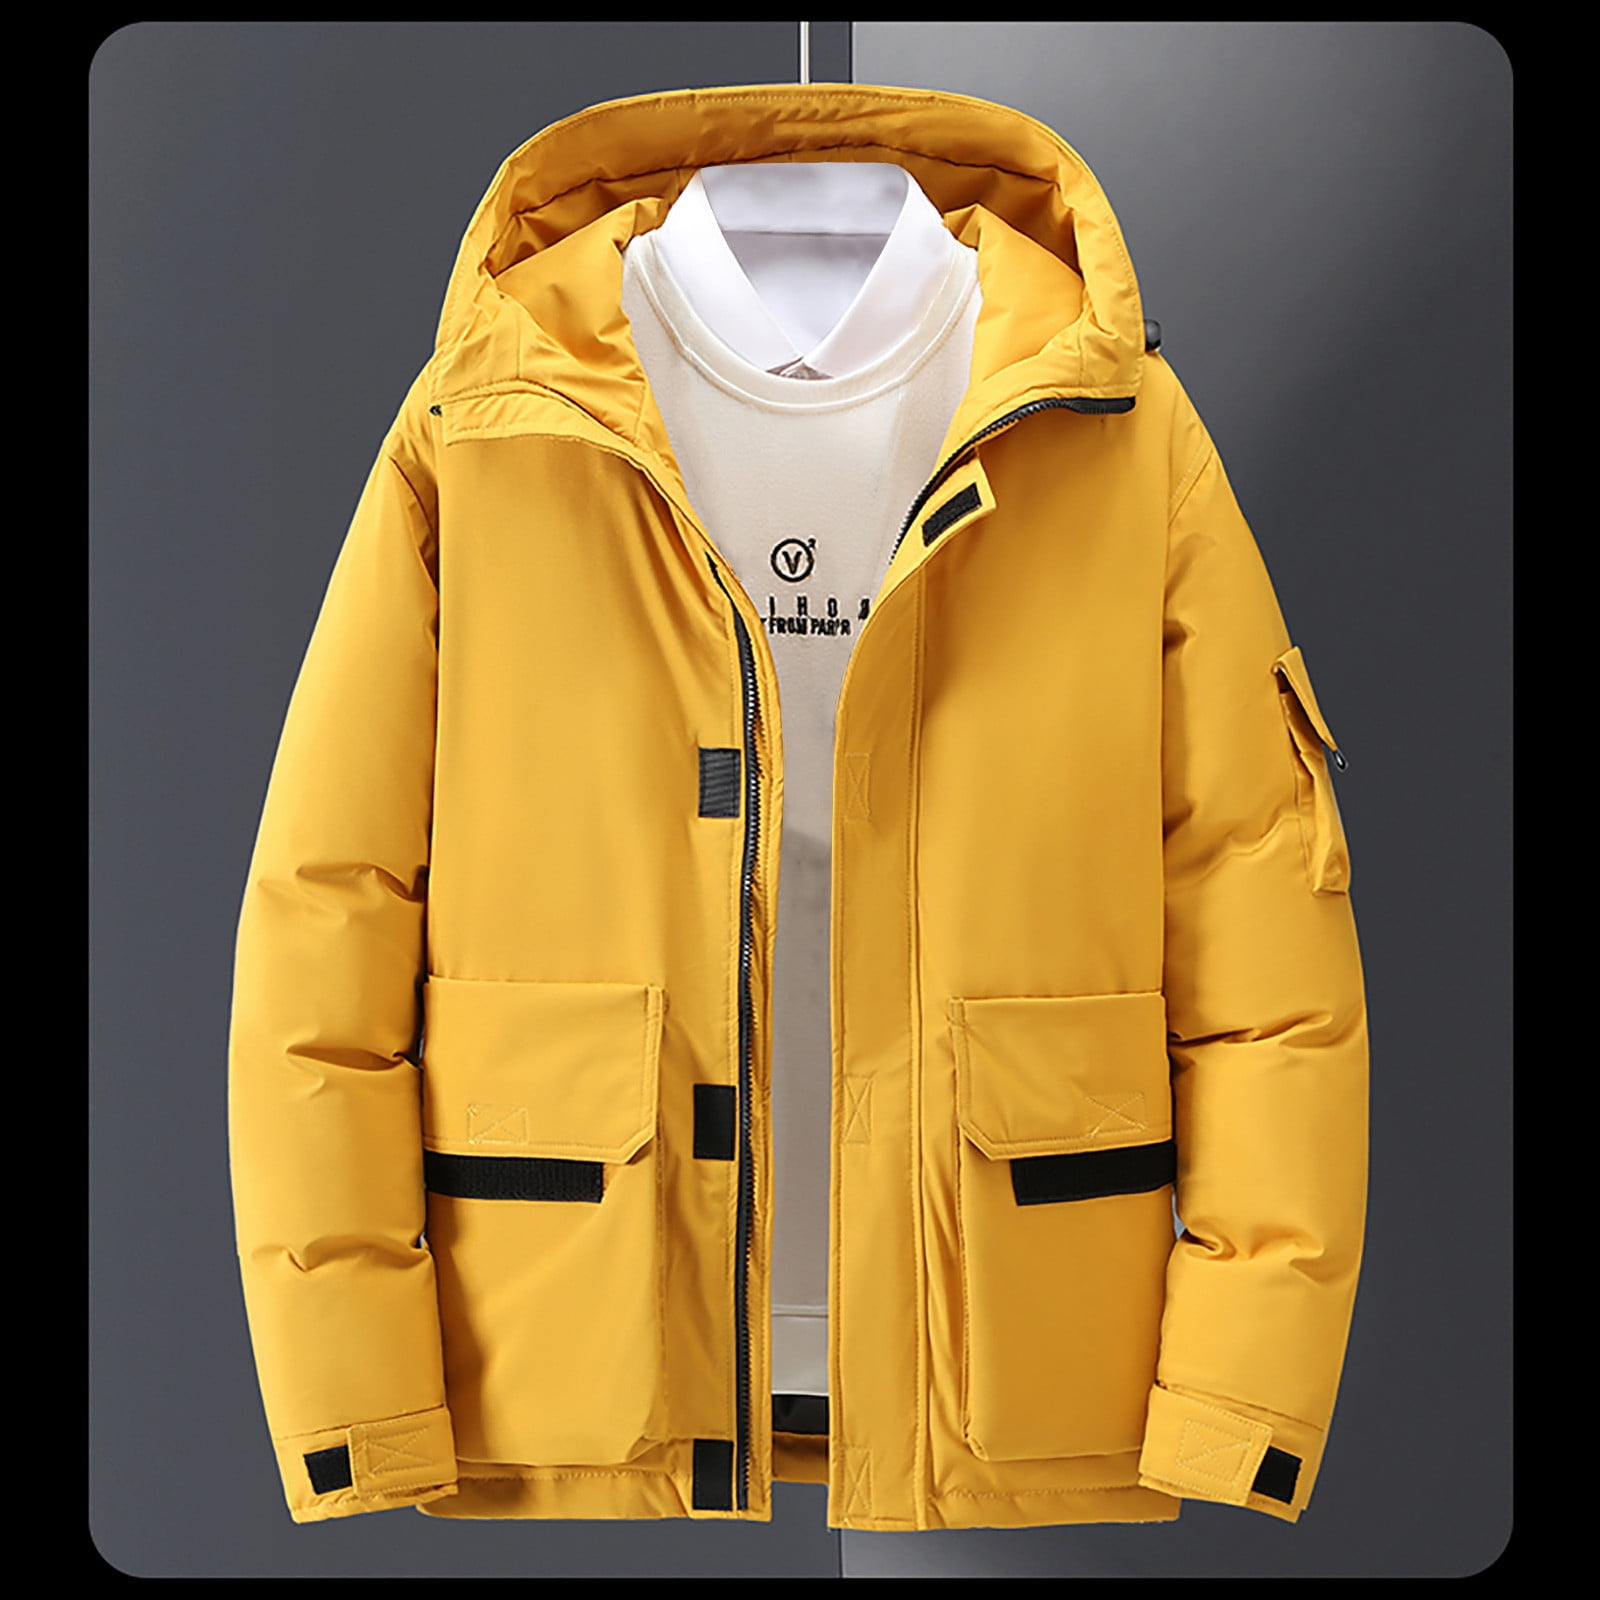 Landscap Mens Autumn Winter Warm Military Jacket Mid-Length Thickened Multi-Pocket Hooded Outwear Coat